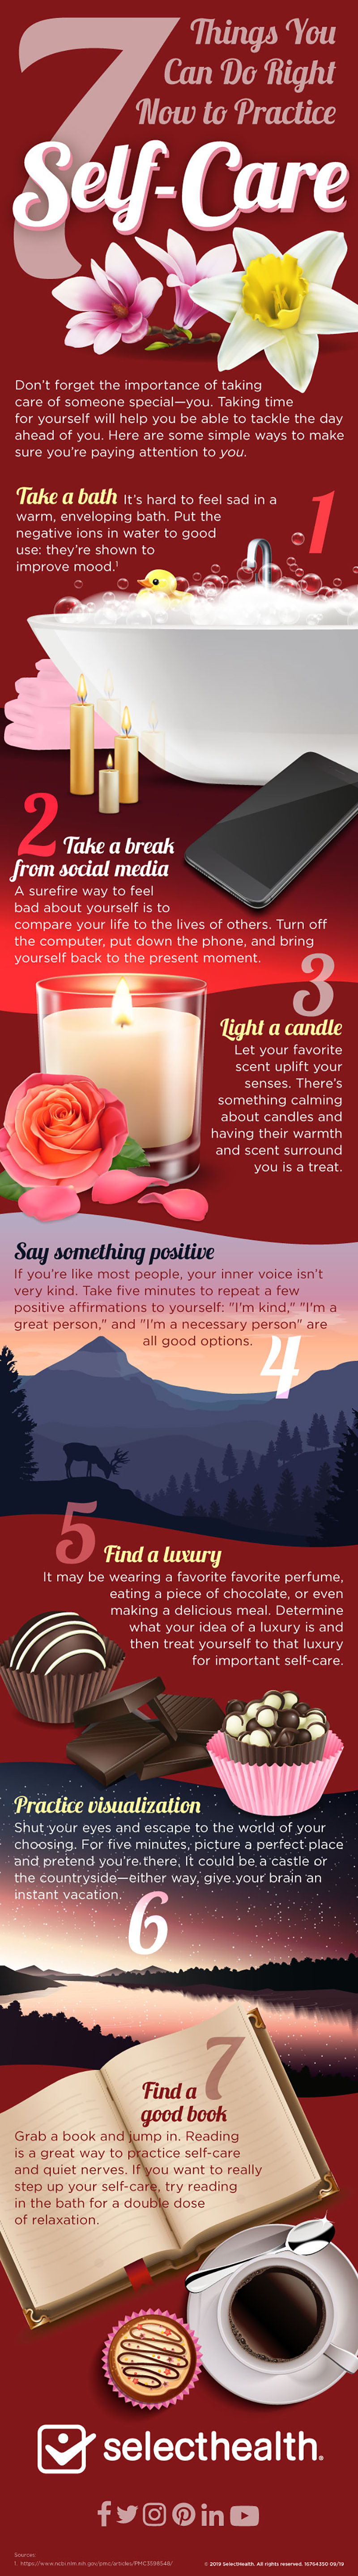 How to practice self-care infographic